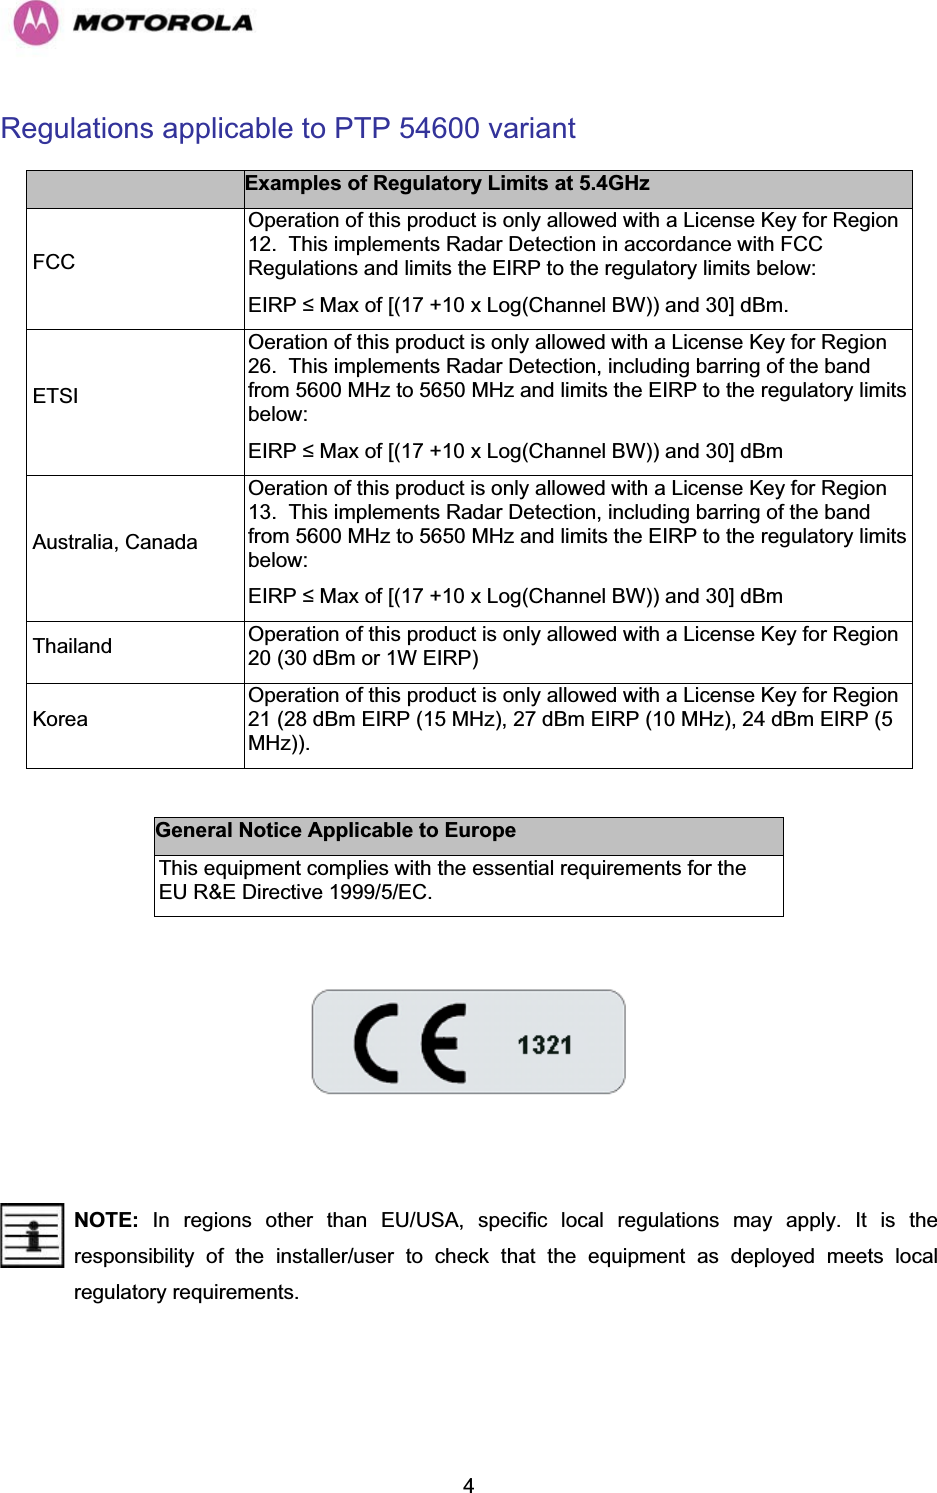   4Regulations applicable to PTP 54600 variant  Examples of Regulatory Limits at 5.4GHz  FCC Operation of this product is only allowed with a License Key for Region 12.  This implements Radar Detection in accordance with FCC Regulations and limits the EIRP to the regulatory limits below: EIRP  Max of [(17 +10 x Log(Channel BW)) and 30] dBm.  ETSI Oeration of this product is only allowed with a License Key for Region 26.  This implements Radar Detection, including barring of the band from 5600 MHz to 5650 MHz and limits the EIRP to the regulatory limits below: EIRP  Max of [(17 +10 x Log(Channel BW)) and 30] dBm  Australia, Canada Oeration of this product is only allowed with a License Key for Region 13.  This implements Radar Detection, including barring of the band from 5600 MHz to 5650 MHz and limits the EIRP to the regulatory limits below: EIRP  Max of [(17 +10 x Log(Channel BW)) and 30] dBm  Thailand  Operation of this product is only allowed with a License Key for Region 20 (30 dBm or 1W EIRP)  Korea Operation of this product is only allowed with a License Key for Region 21 (28 dBm EIRP (15 MHz), 27 dBm EIRP (10 MHz), 24 dBm EIRP (5 MHz)).  General Notice Applicable to Europe This equipment complies with the essential requirements for the EU R&amp;E Directive 1999/5/EC.    NOTE:  In regions other than EU/USA, specific local regulations may apply. It is the responsibility of the installer/user to check that the equipment as deployed meets local regulatory requirements. 